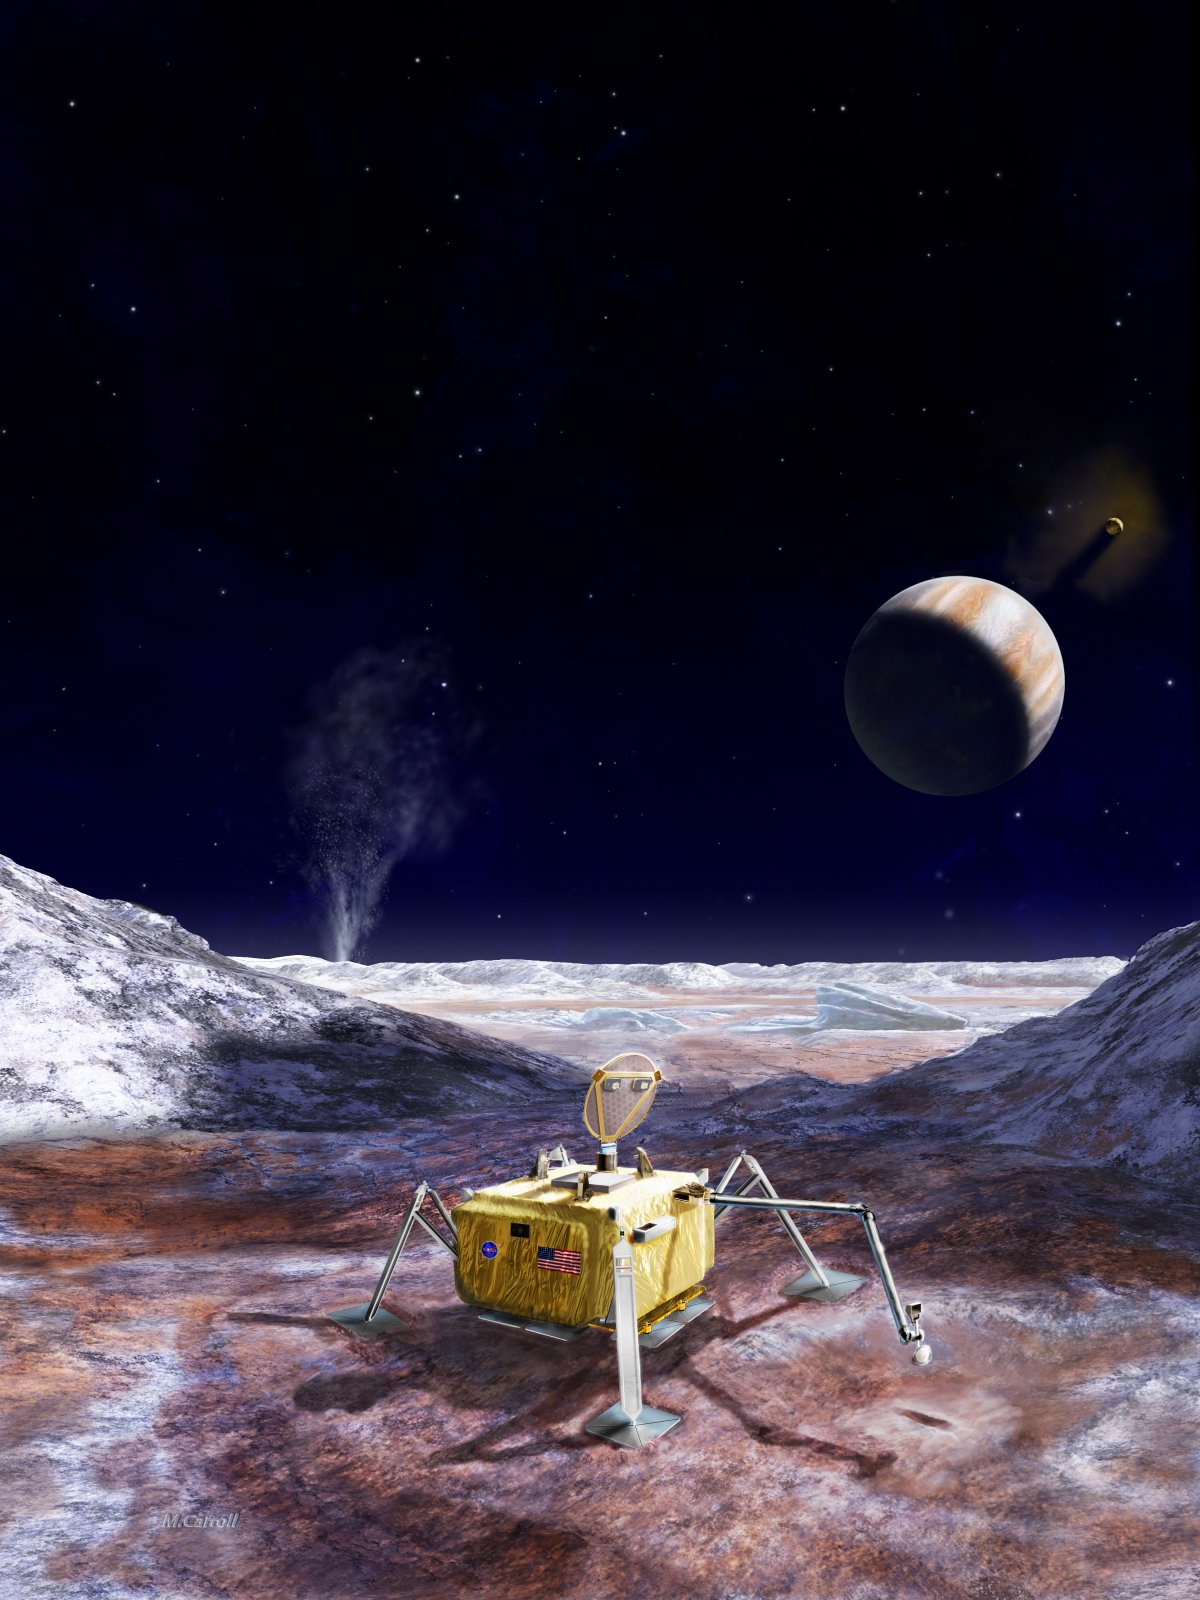 Potential future mission to land a robotic probe on Europa. (NASA/JPL-Caltech)